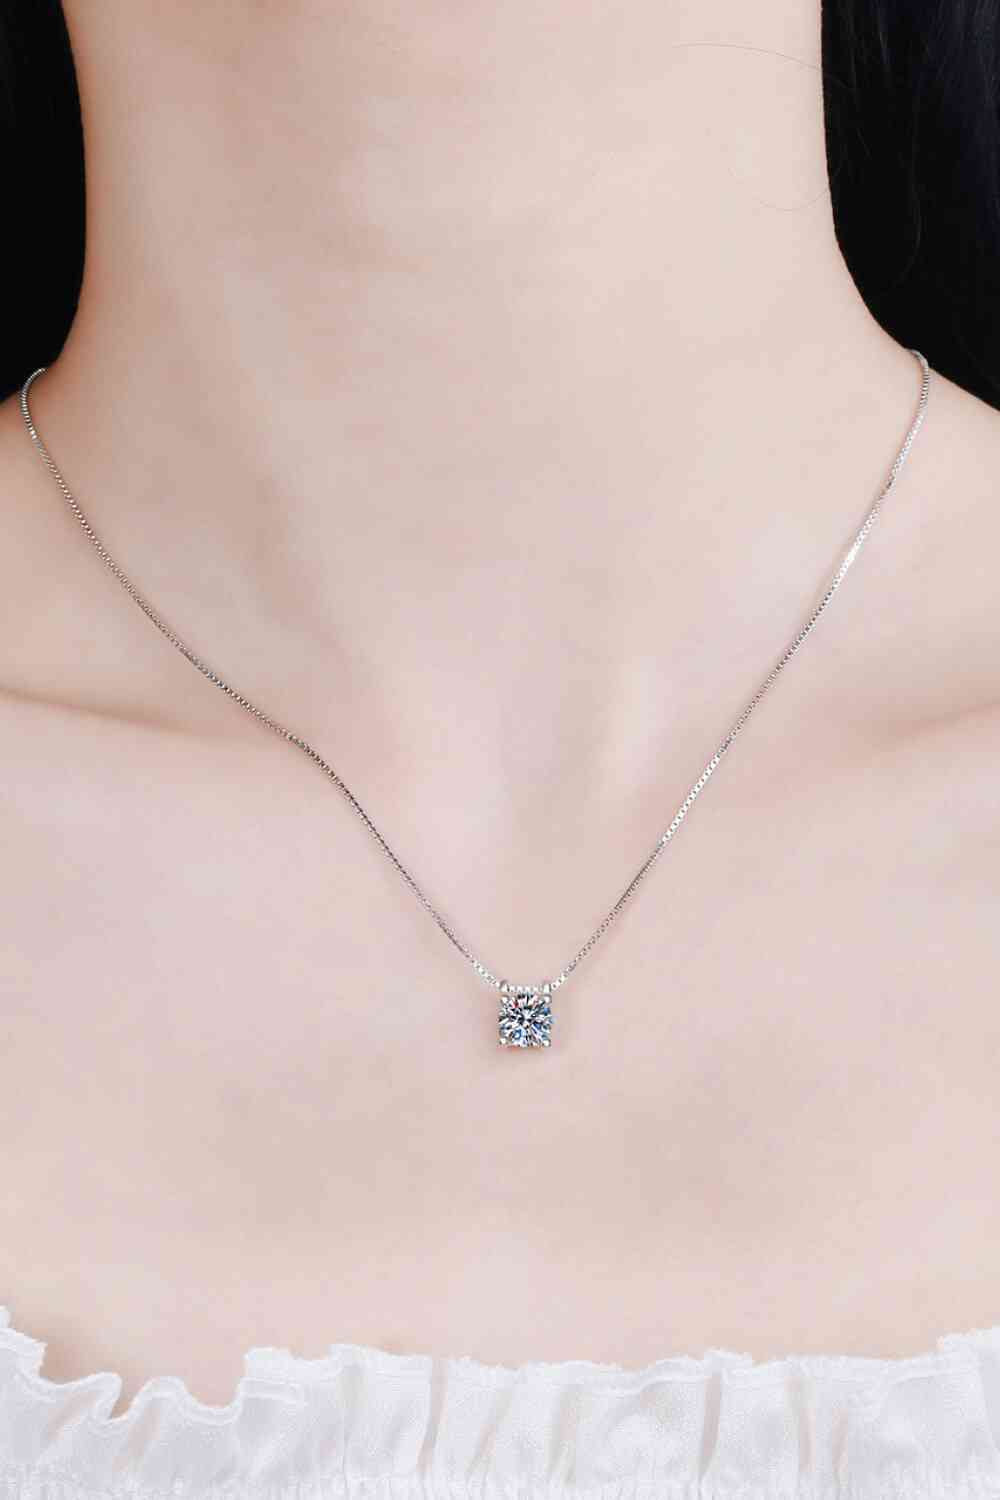 1 Carat Moissanite 925 Sterling Silver Chain Necklace - lolaluxeshop